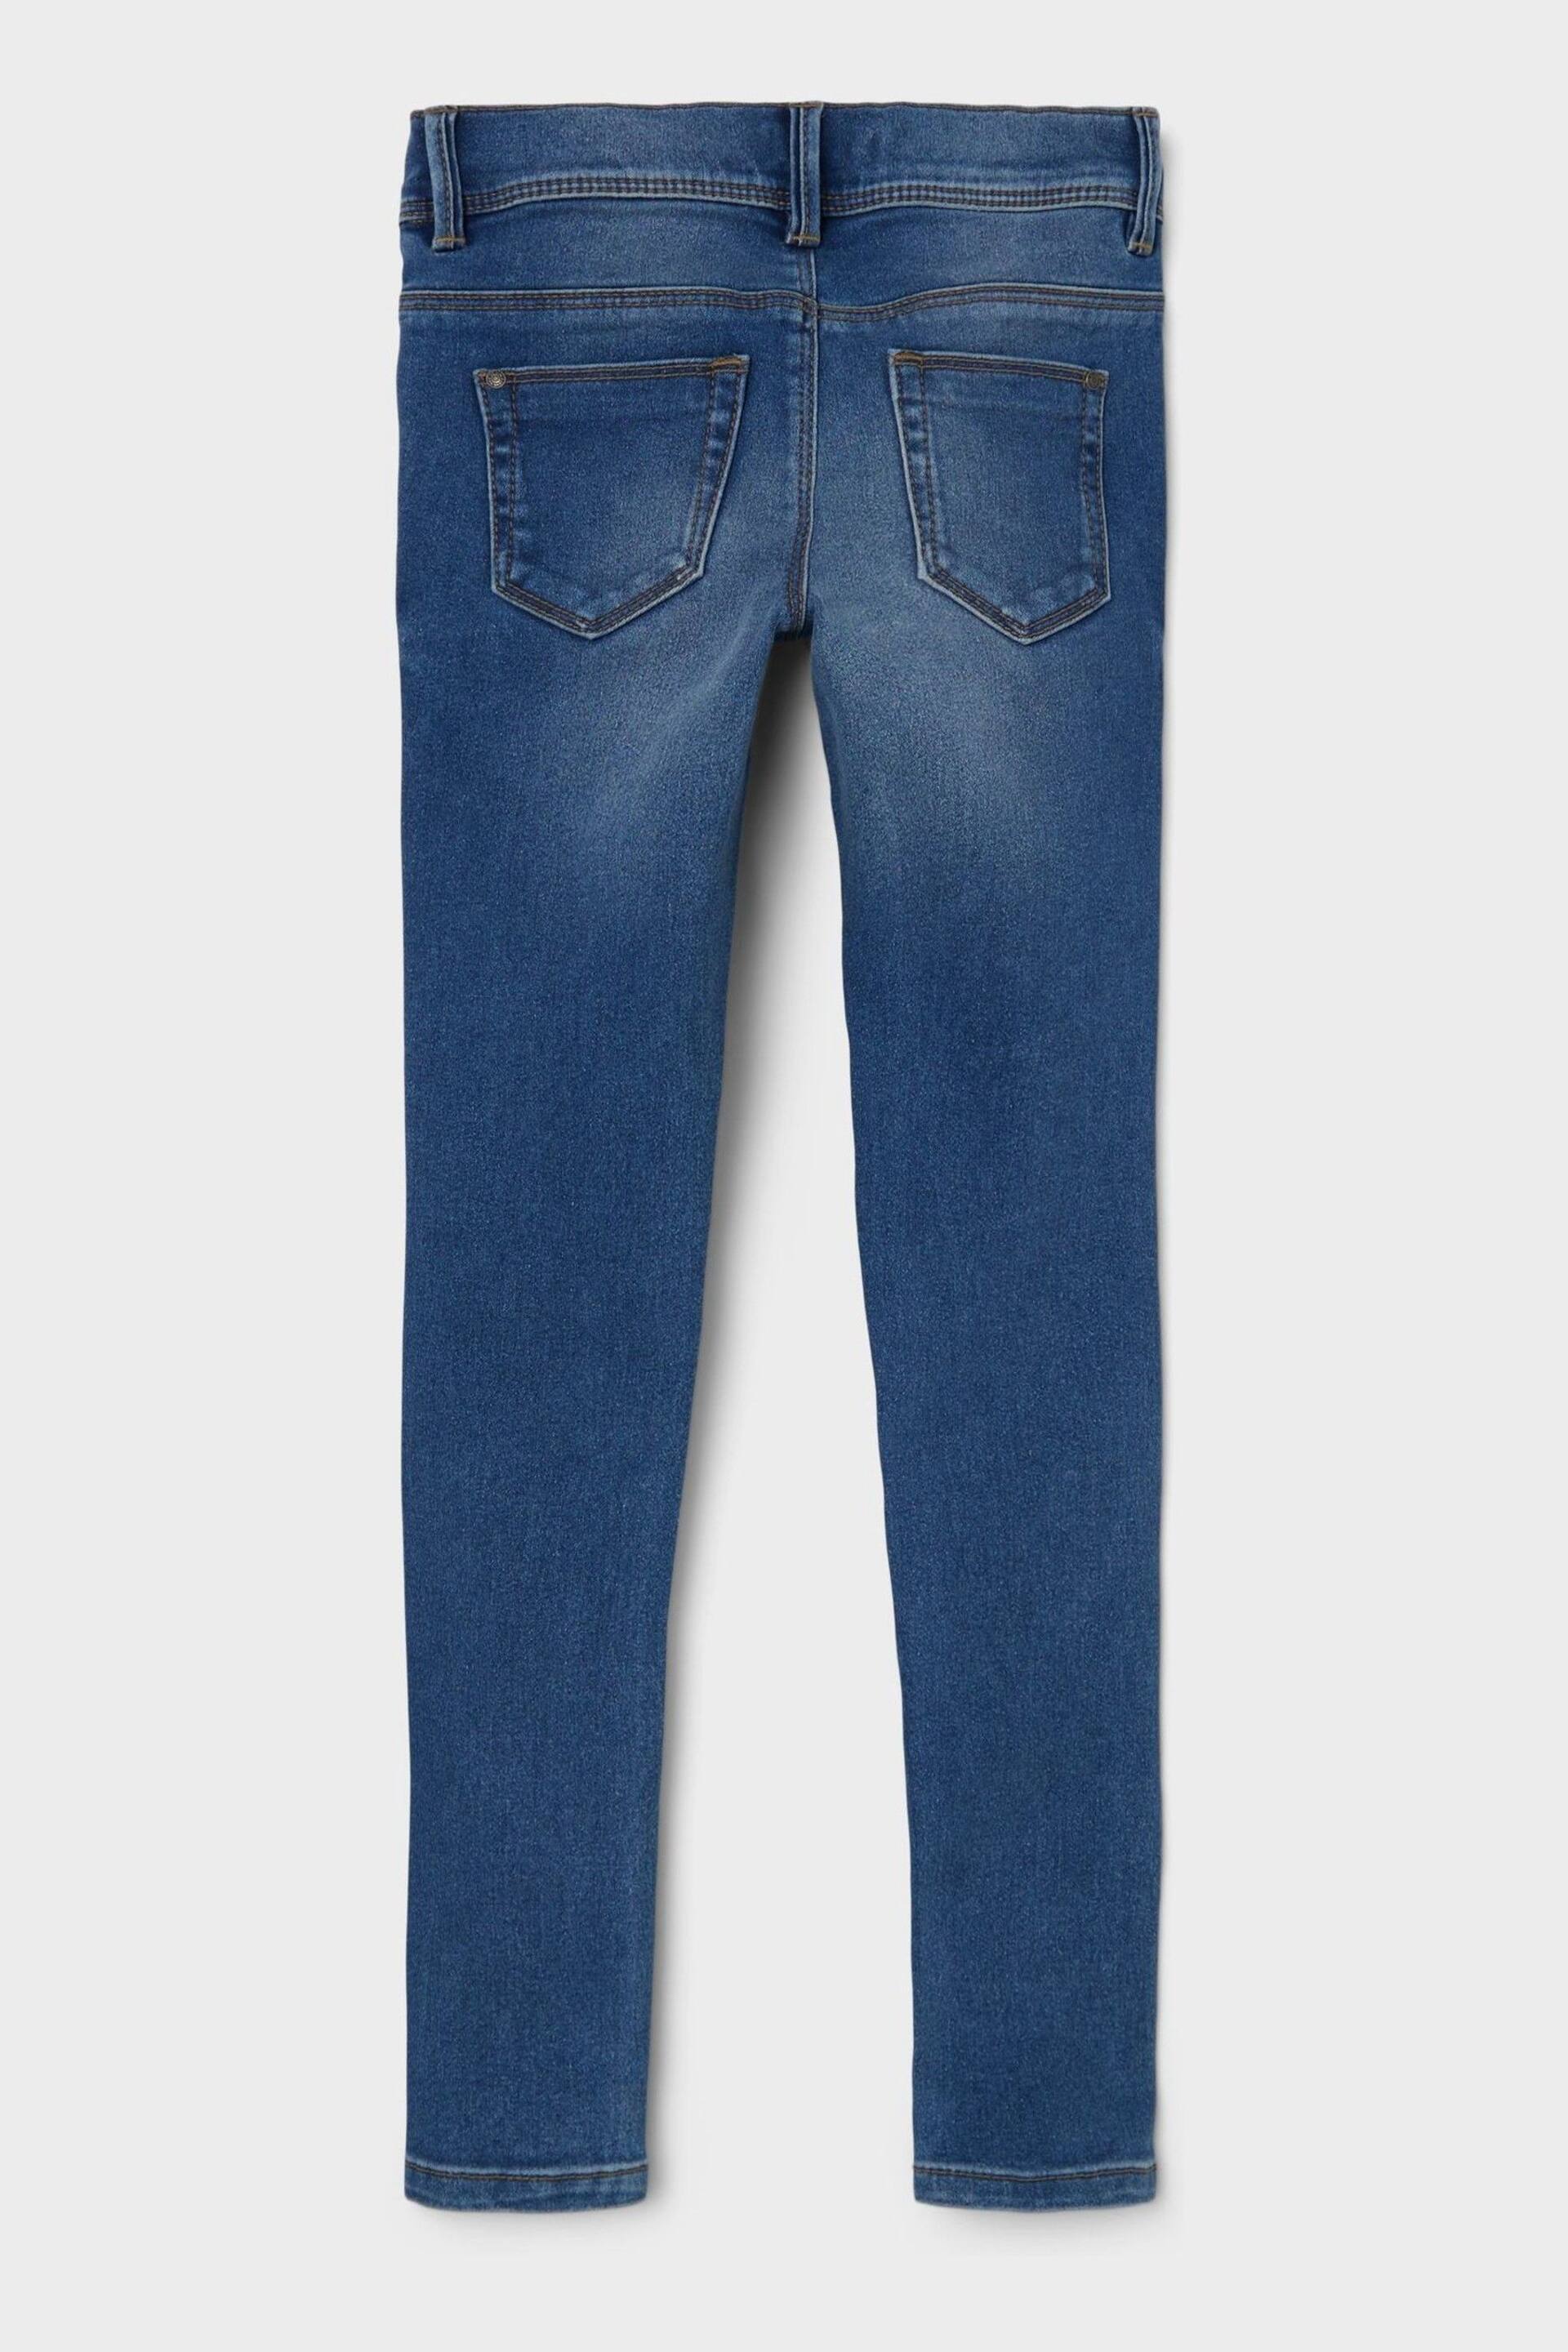 Name It Blue Skinny Jeans - Image 4 of 5